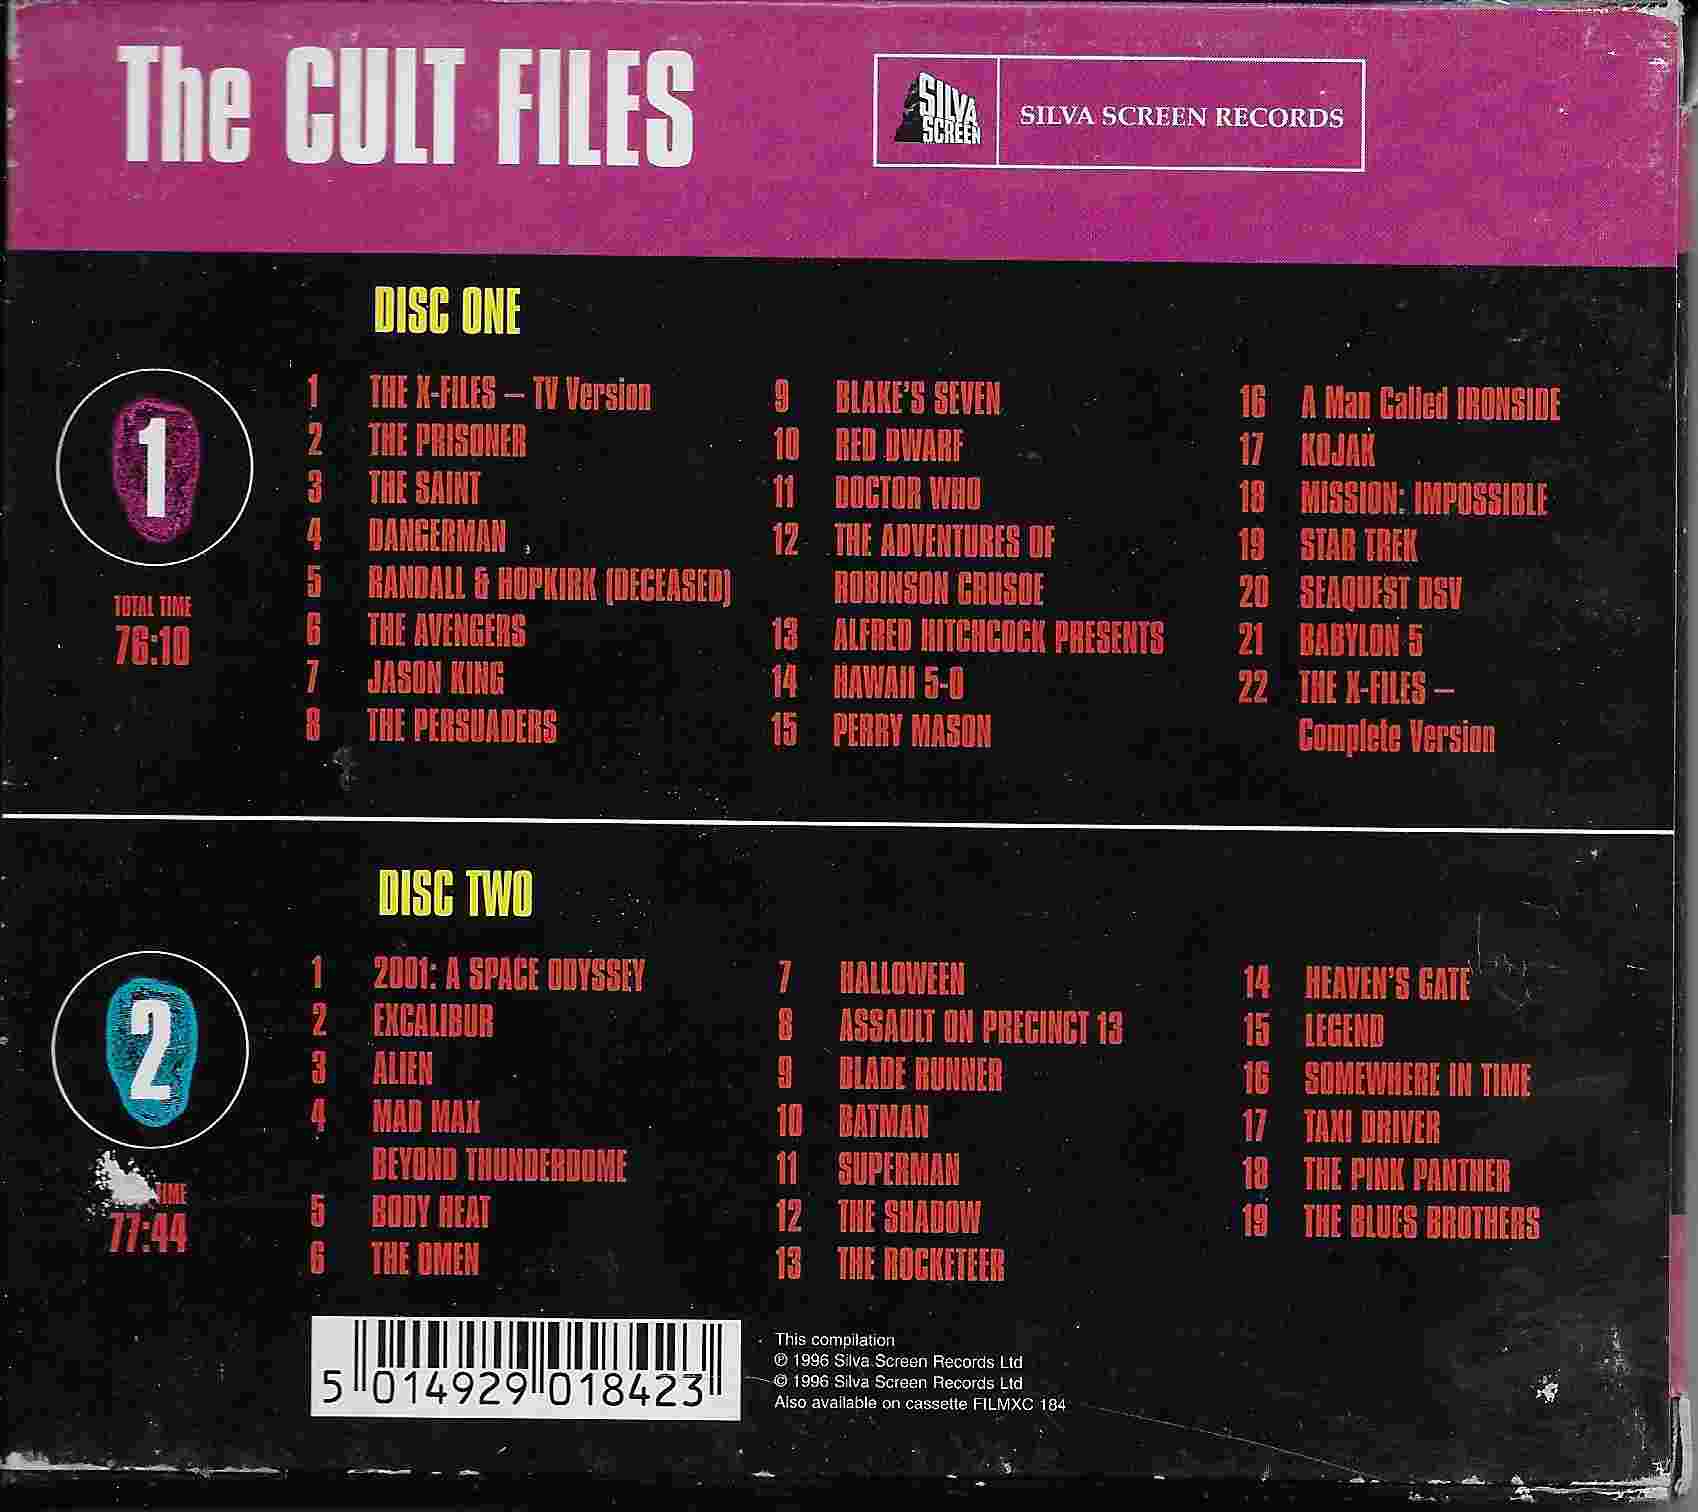 Picture of FILMXCD 184 The cult files by artist Various from ITV, Channel 4 and Channel 5 library